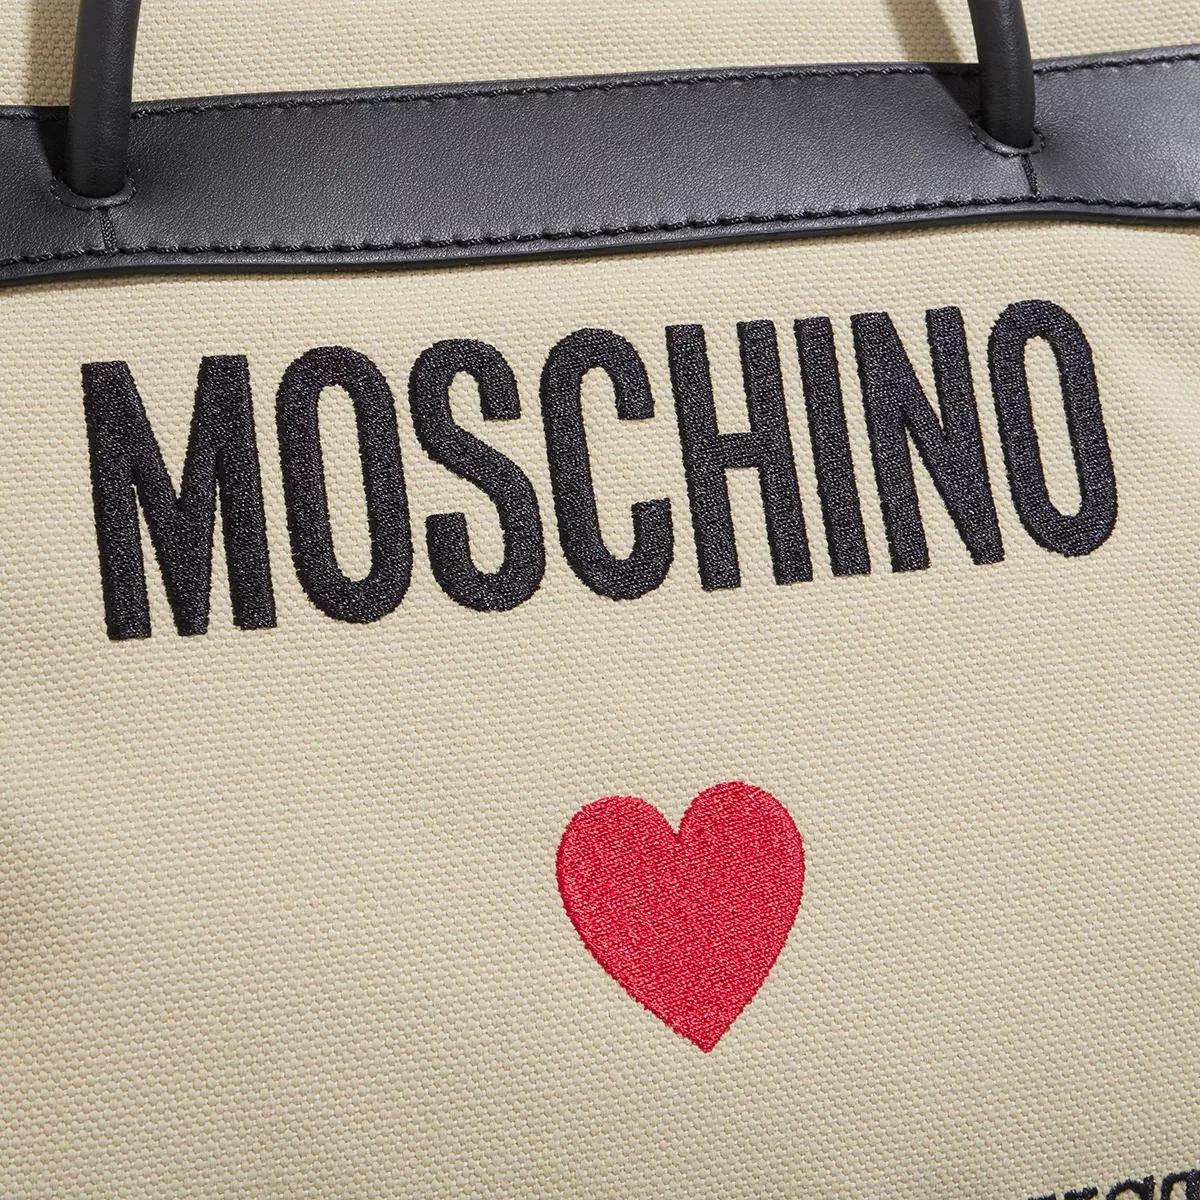 Moschino Totes In Love We Trust-Shopping Bag in beige